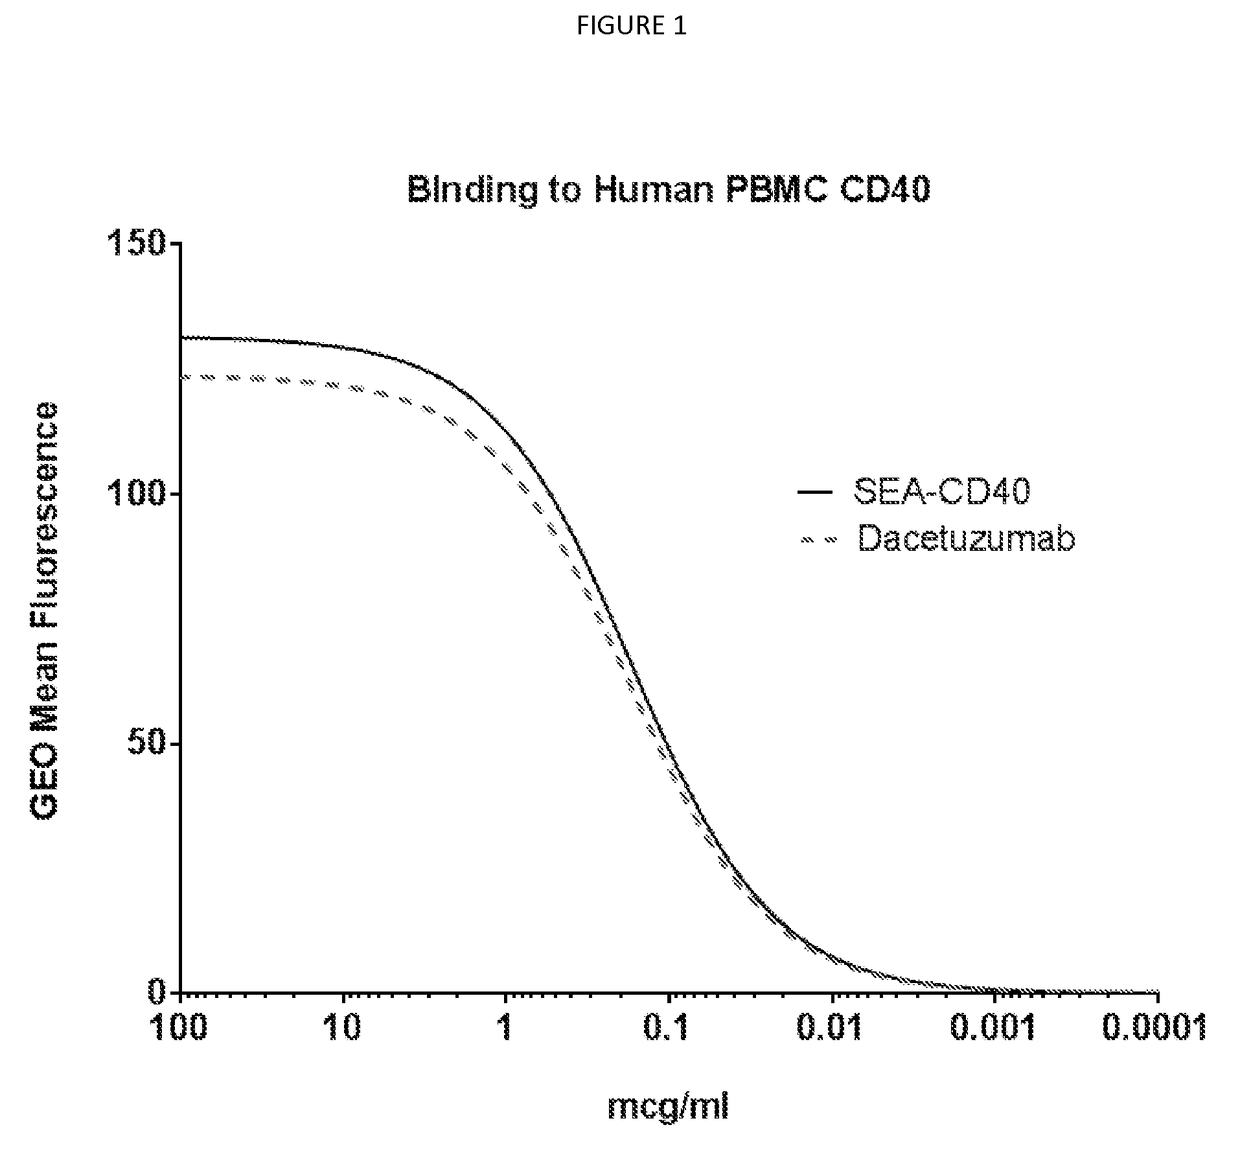 Dosage and administration of non-fucosylated Anti-cd40 antibodies